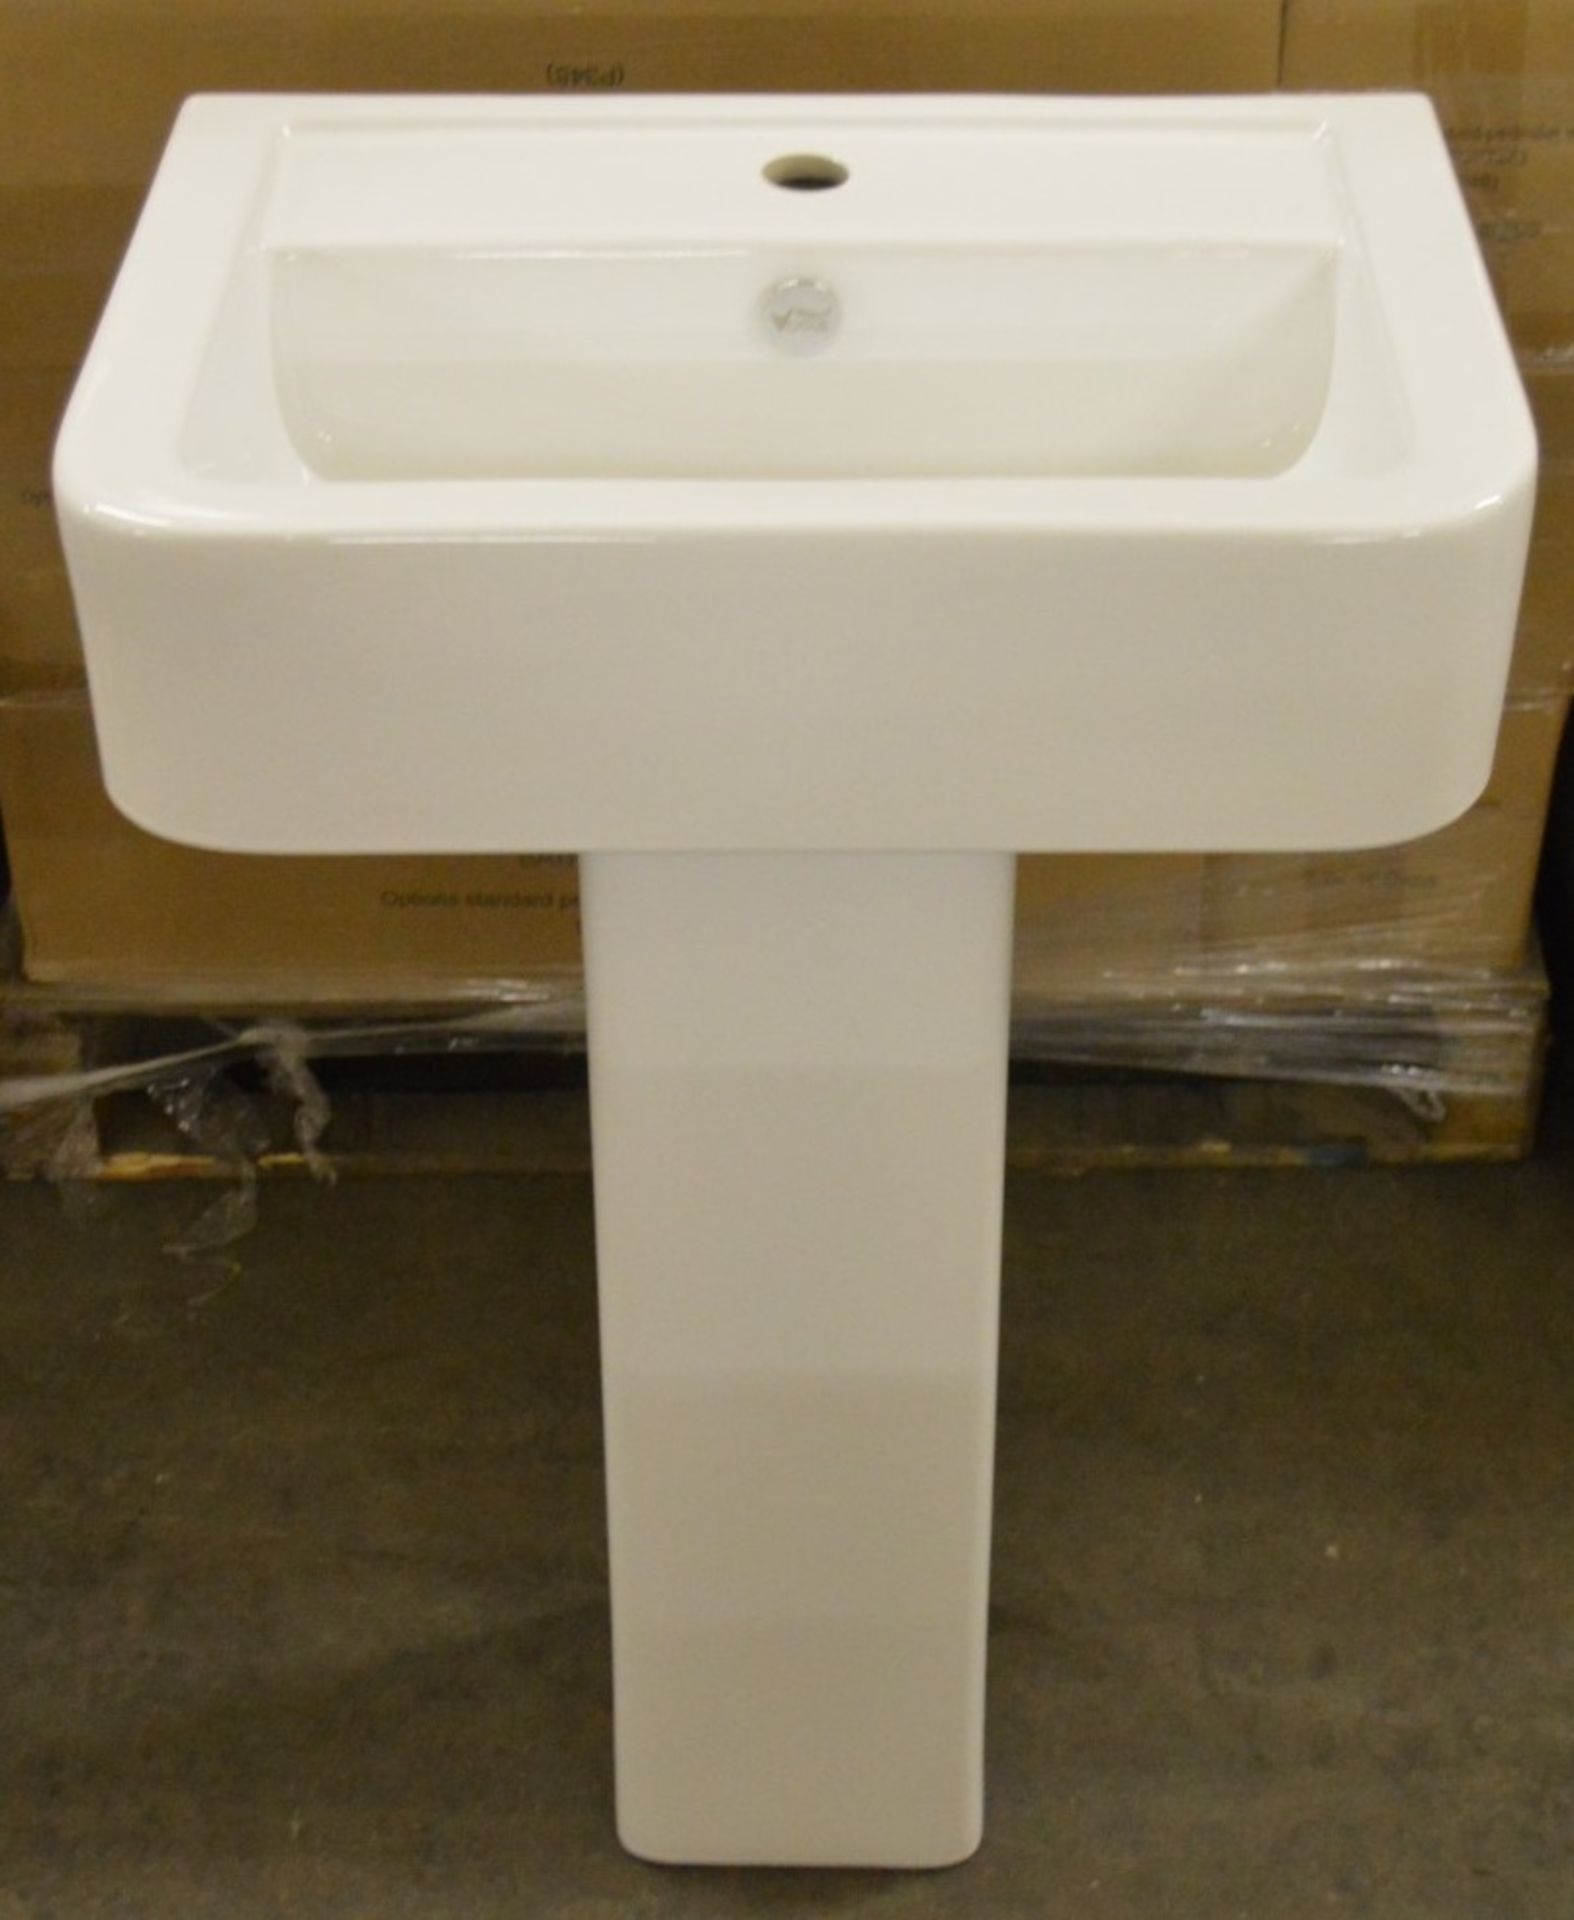 1 x Vogue Bathrooms OPTIONS Single Tap Hole SINK BASIN With Pedestal - 580mm Width - Brand New Boxed - Image 8 of 8